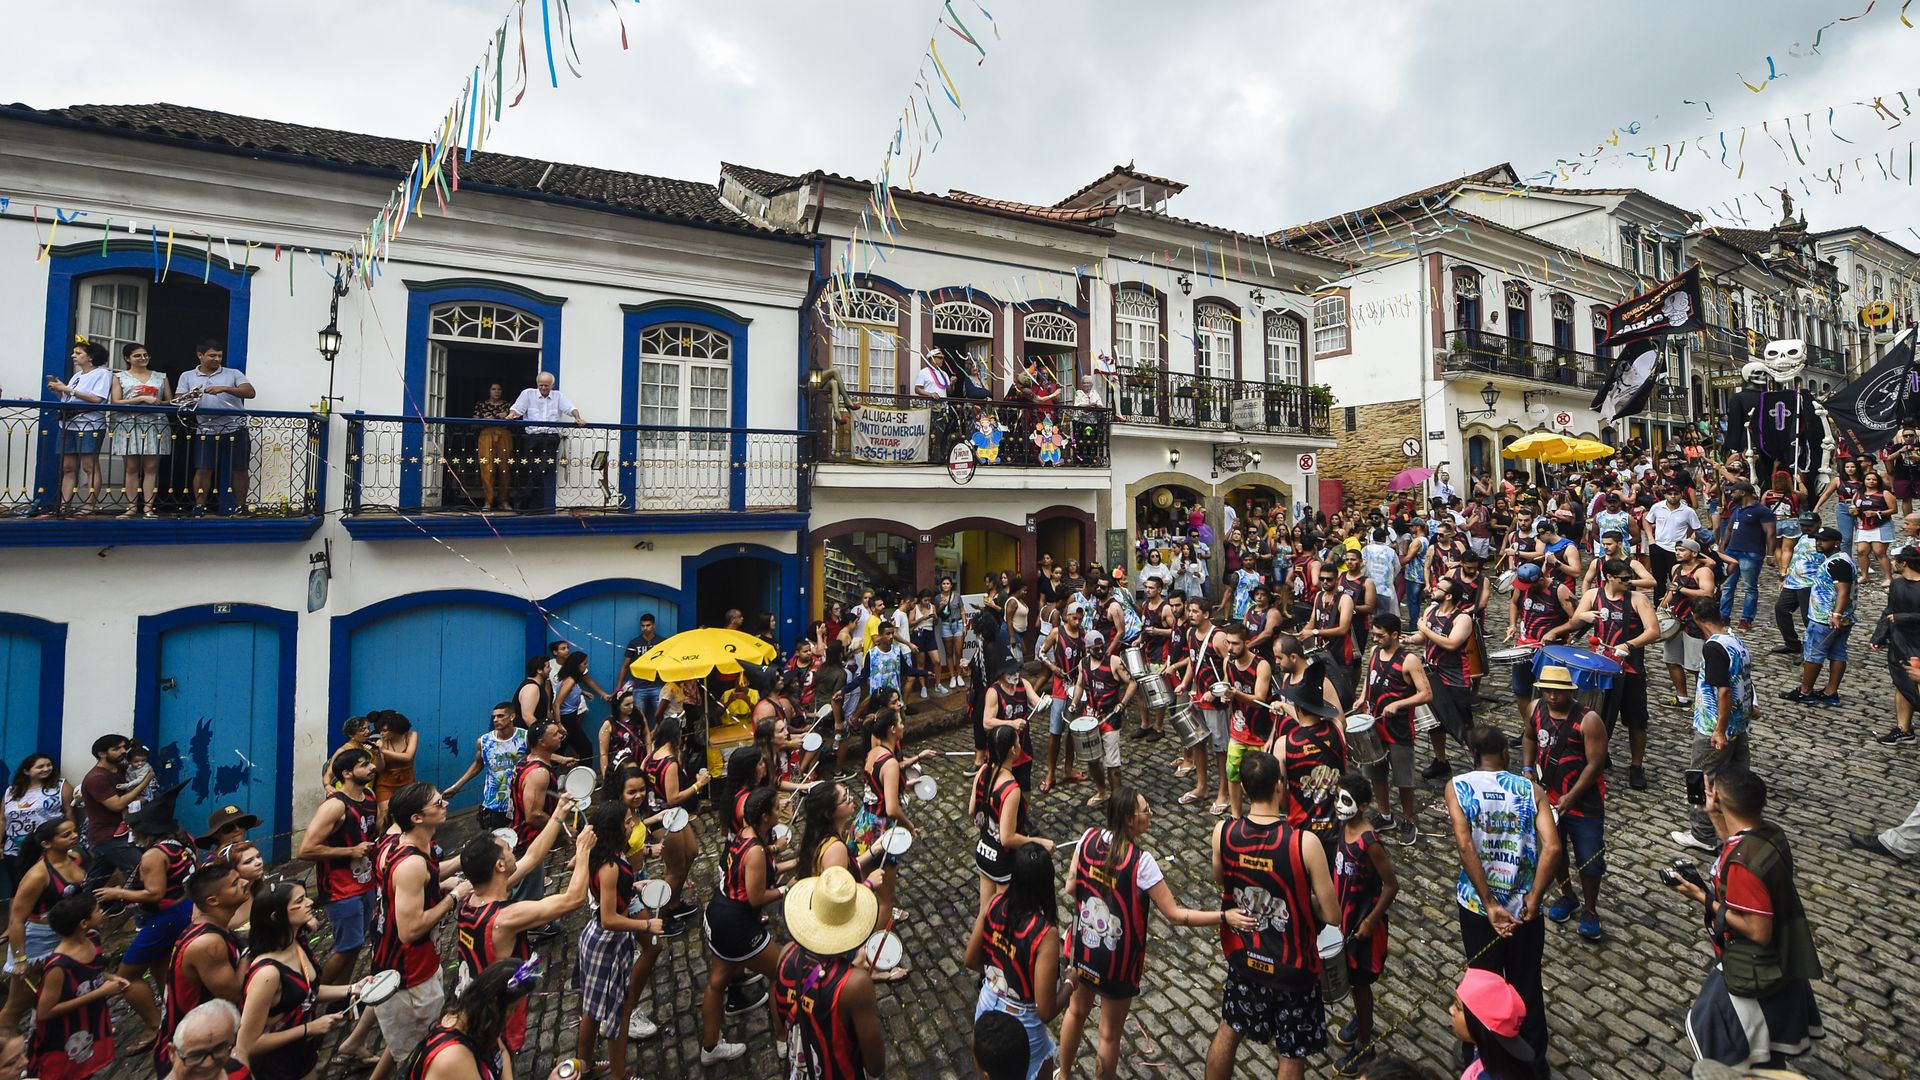 Revelers participate in the celebration of the street carnival of Bloco do Caixao on February 25, 2020 in Ouro Preto, Brazil. (Photo by Pedro Vilela/Getty Images)